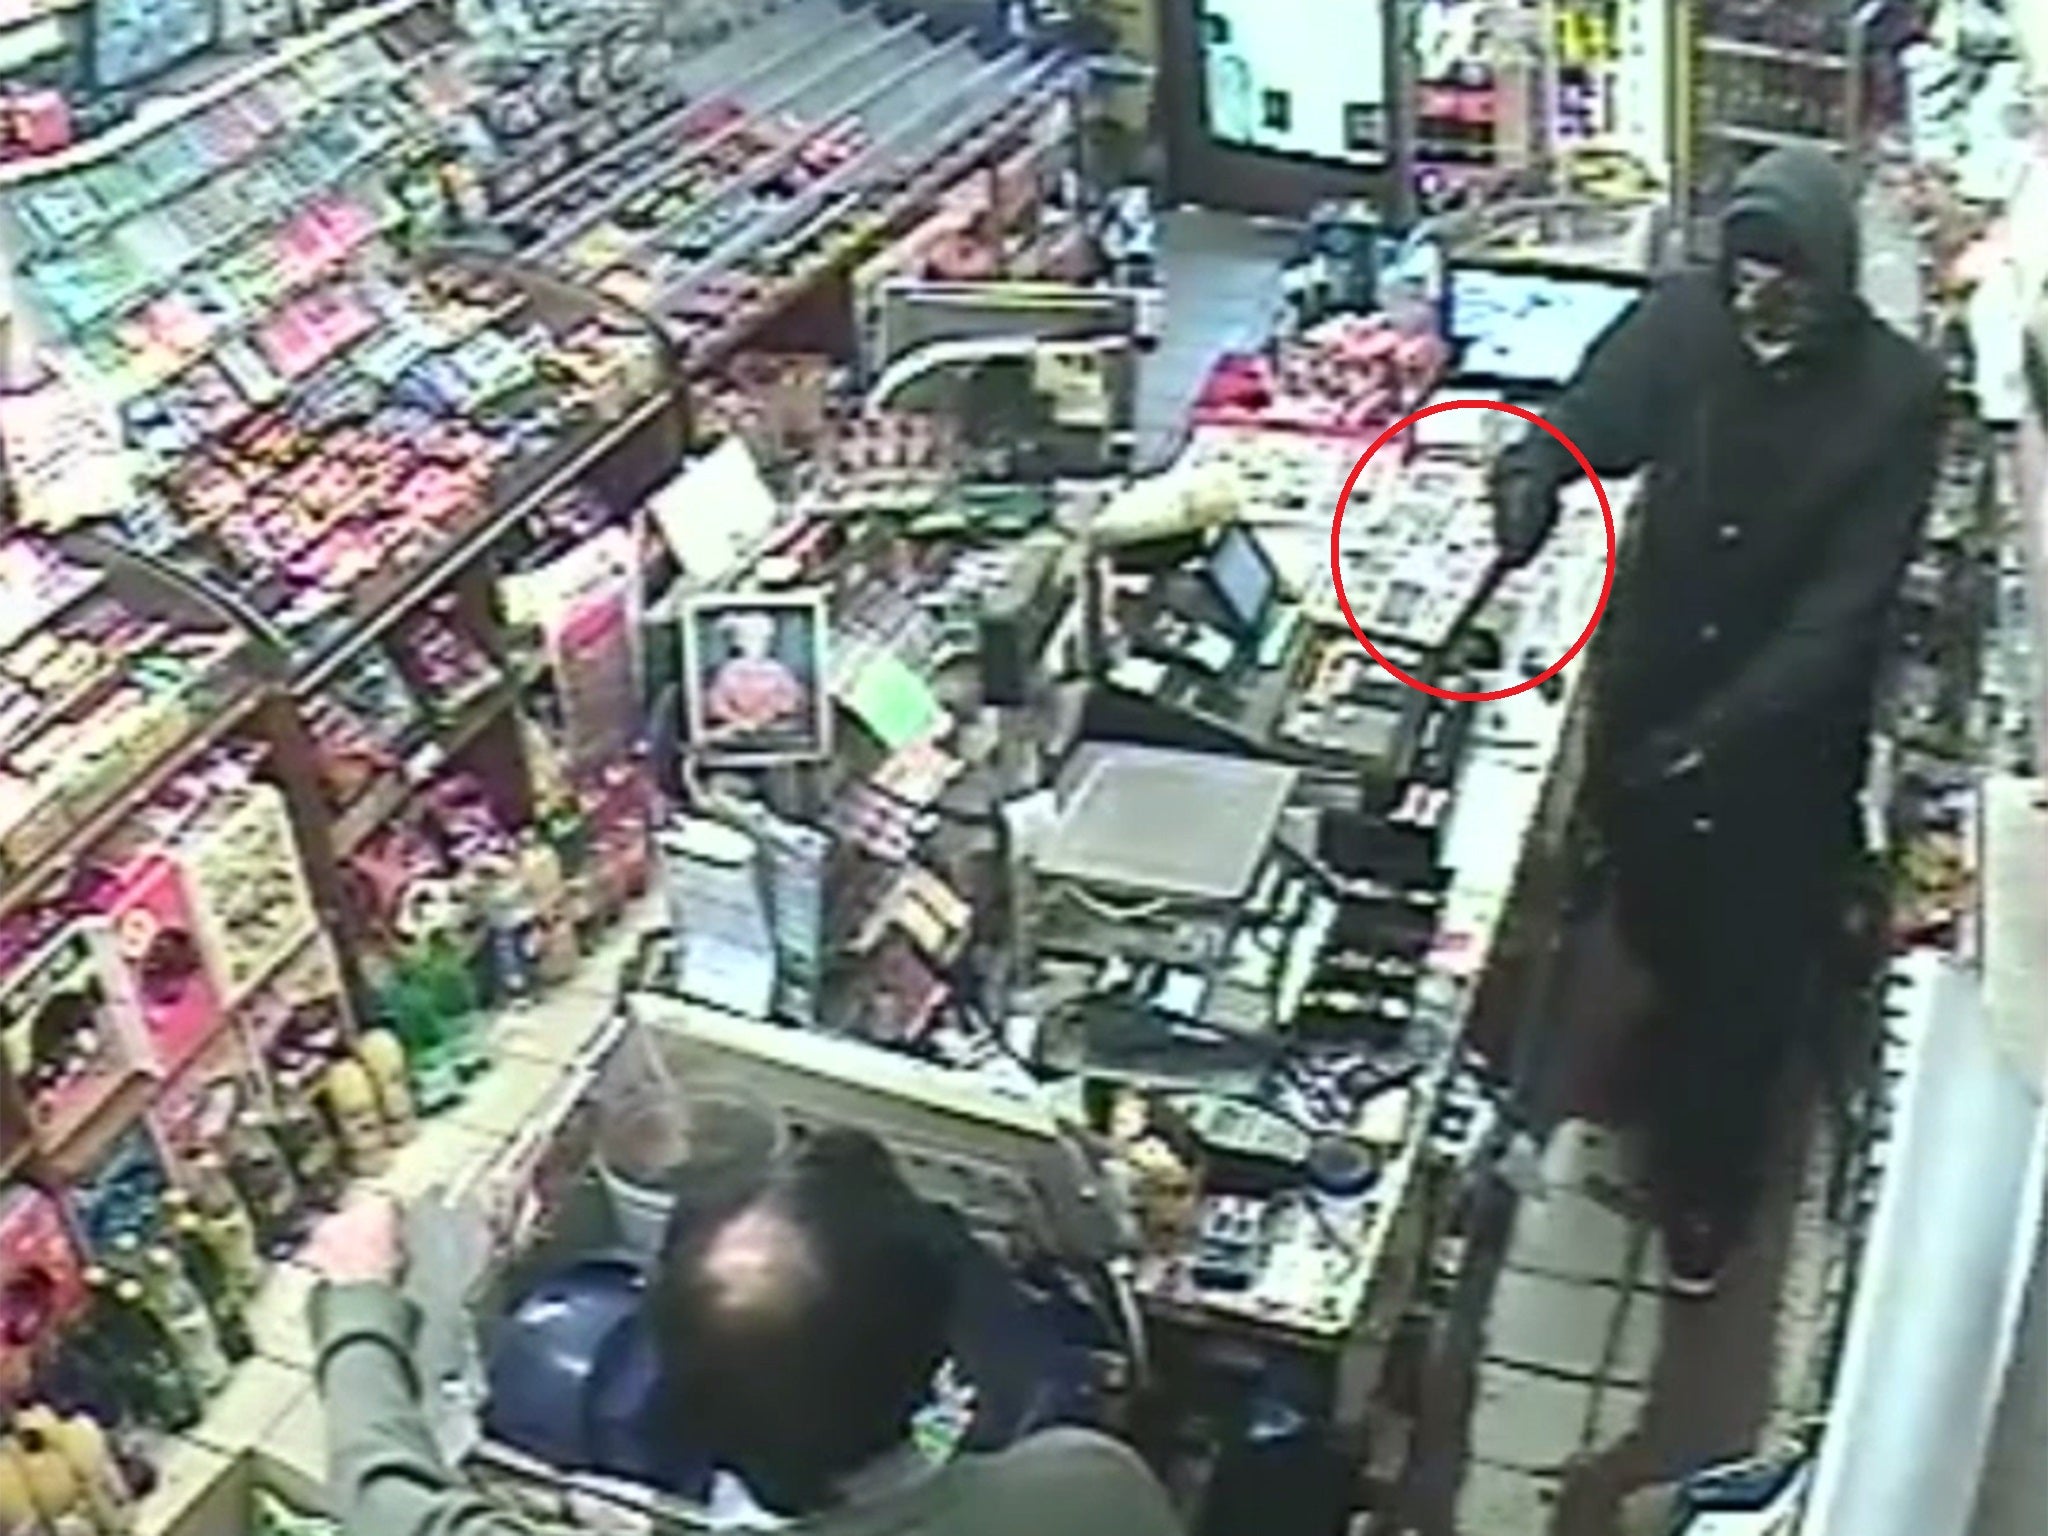 The moment the newsagent owner is threatened with the knife